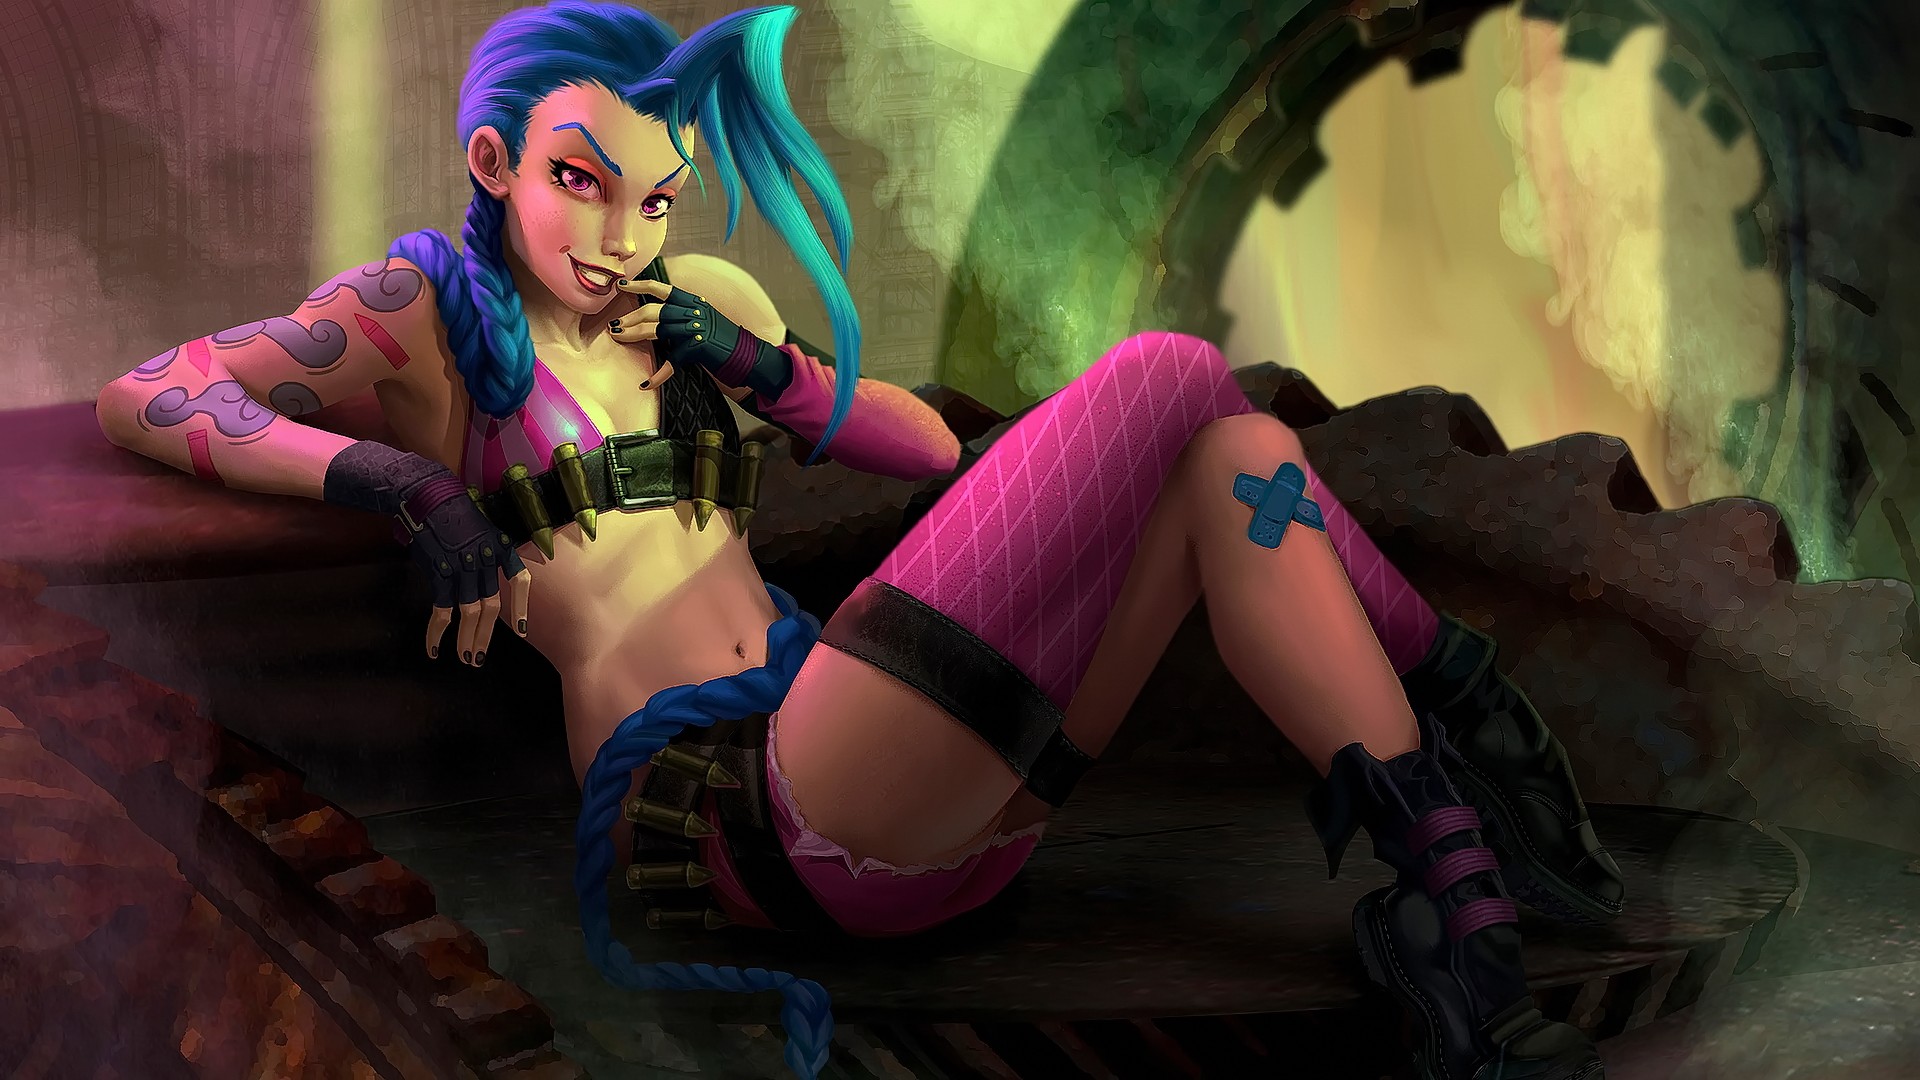 Anime 1920x1080 Jinx (League of Legends) League of Legends fantasy girl legs blue hair PC gaming missing sock video game characters video game girls video game art black nails painted nails inked girls red lipstick stockings